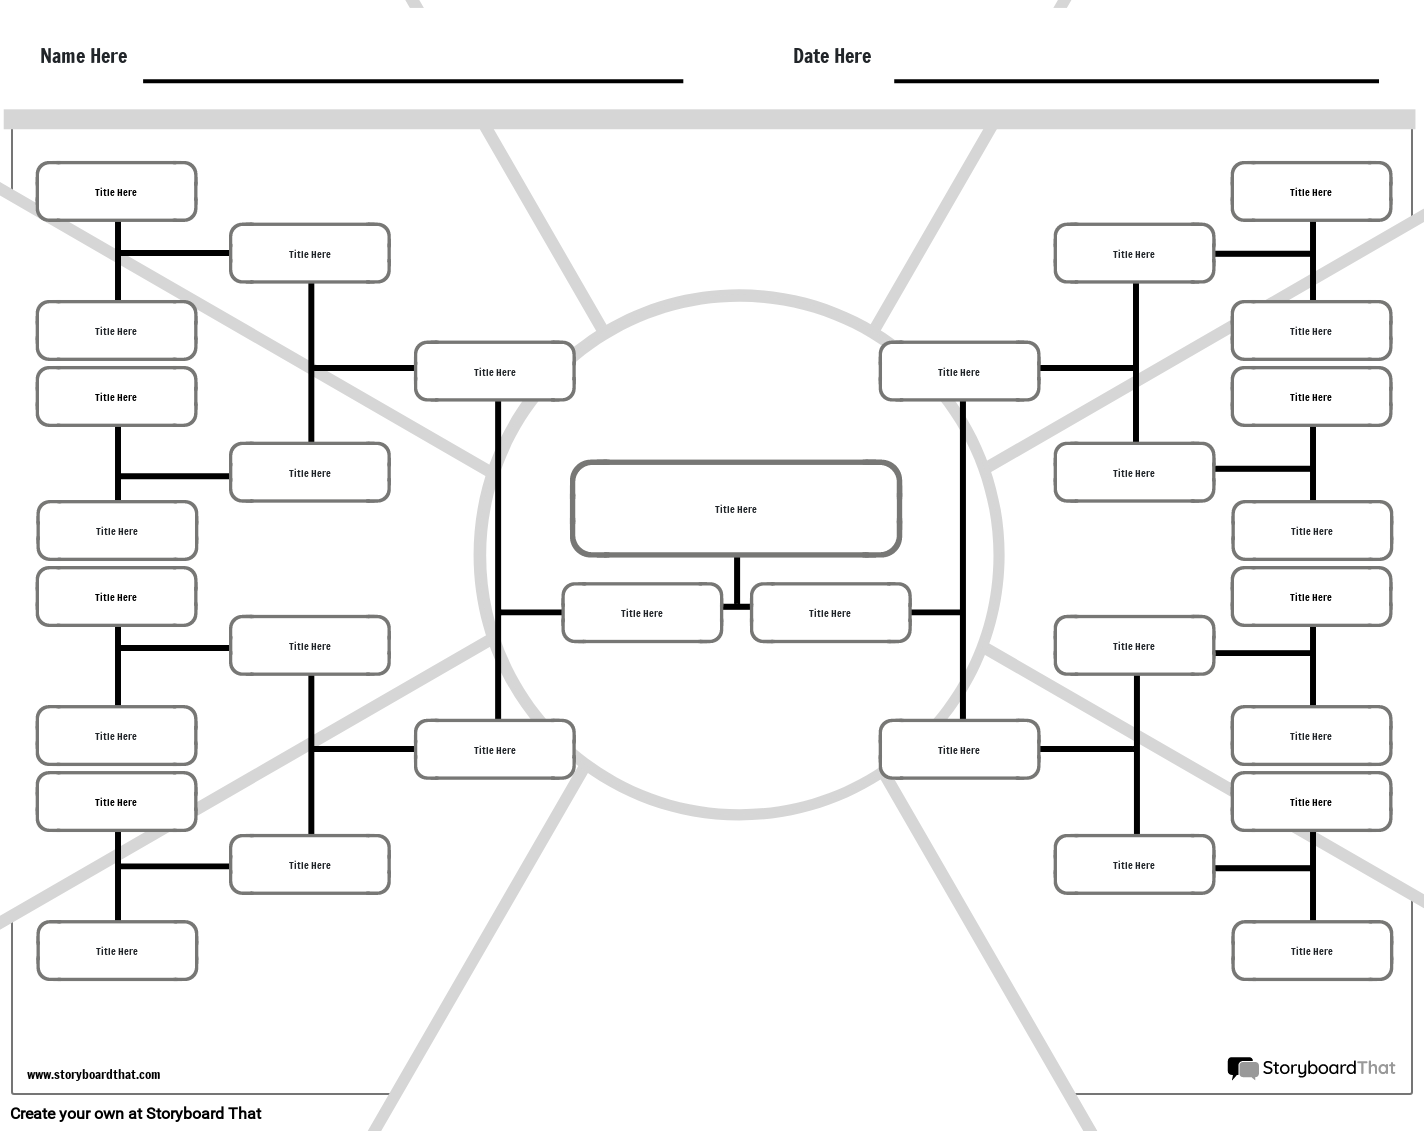 New Create Page Flow Chart Template 5 (Black & White)